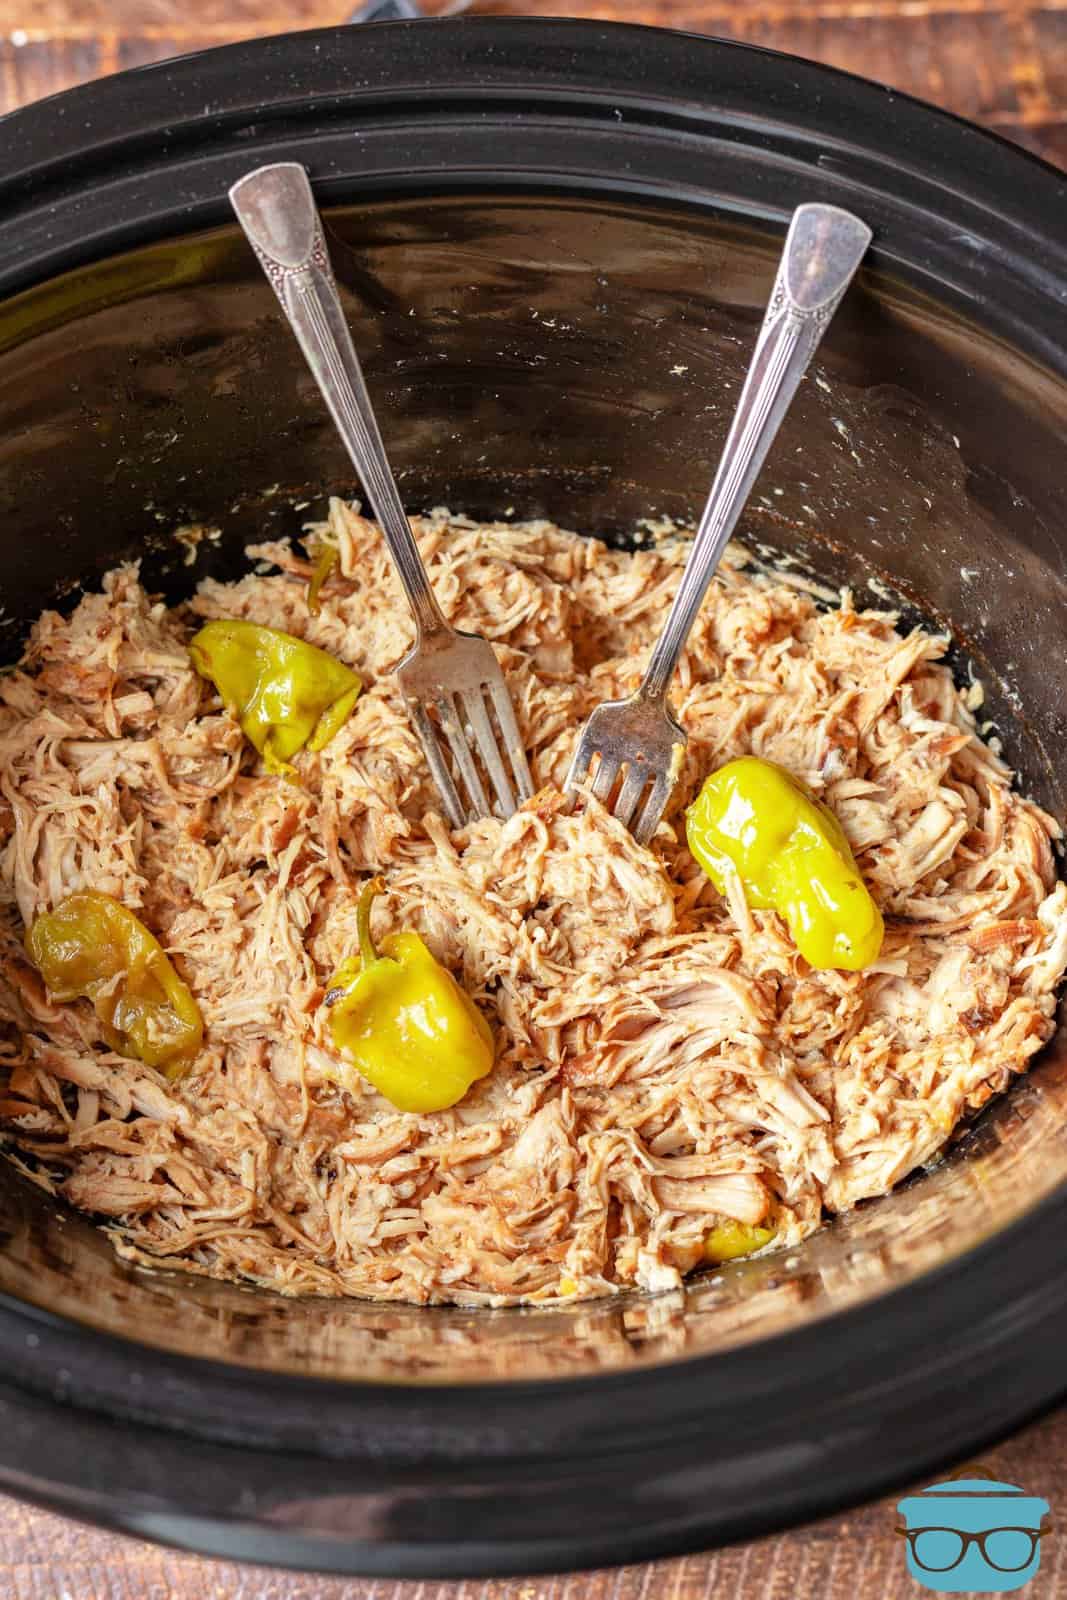 two forks in shredded chicken in a slow cooker.